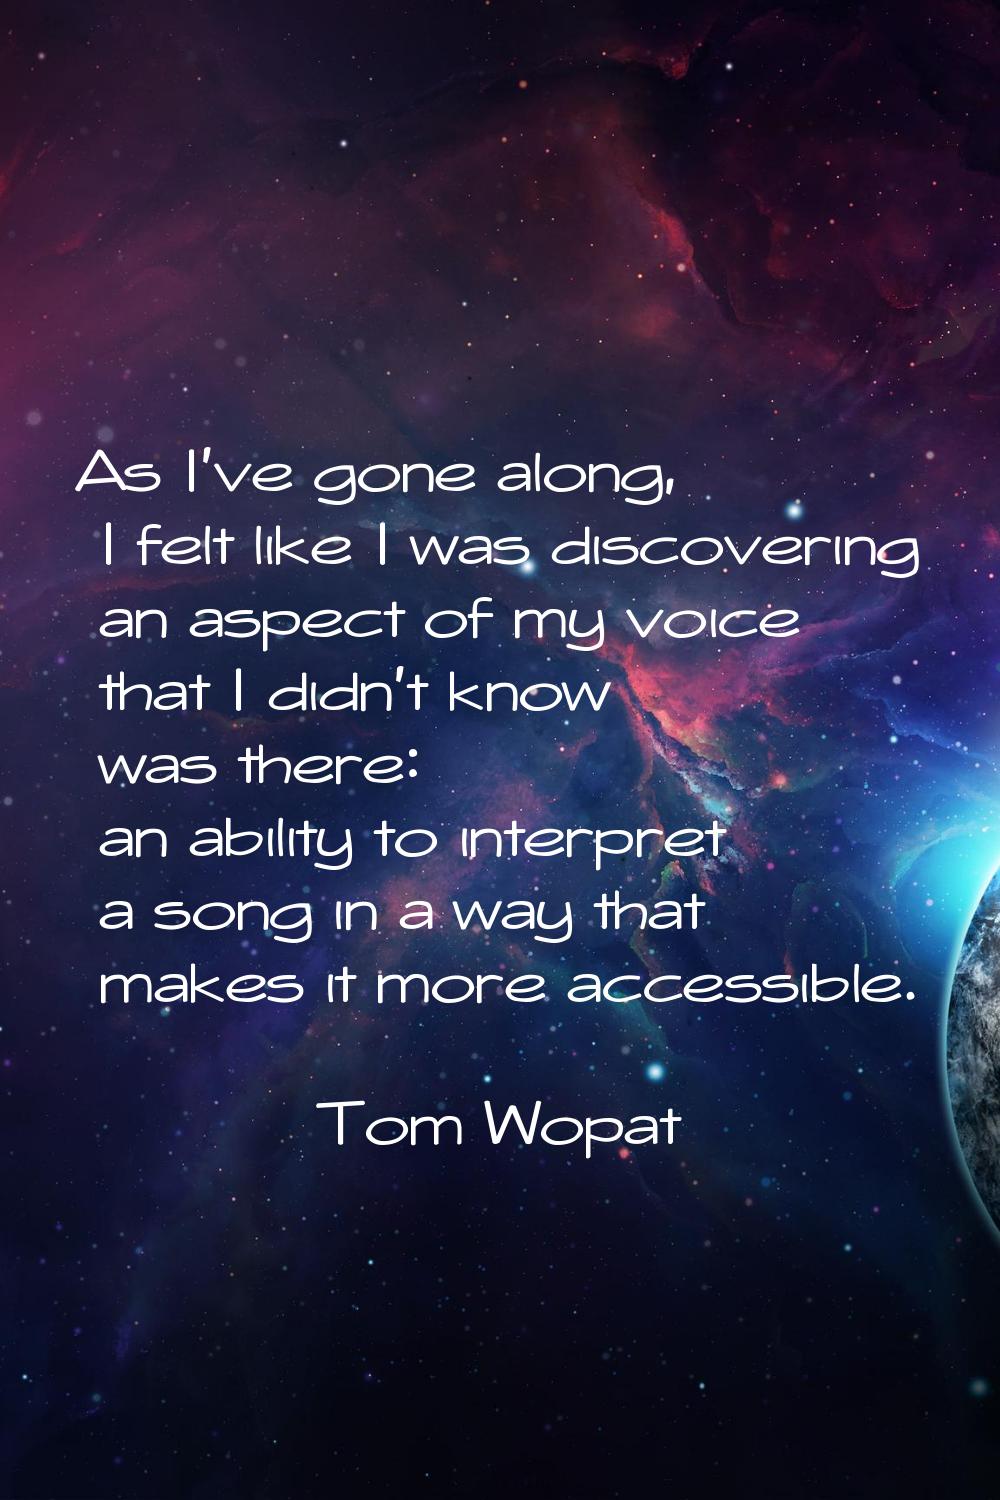 As I've gone along, I felt like I was discovering an aspect of my voice that I didn't know was ther